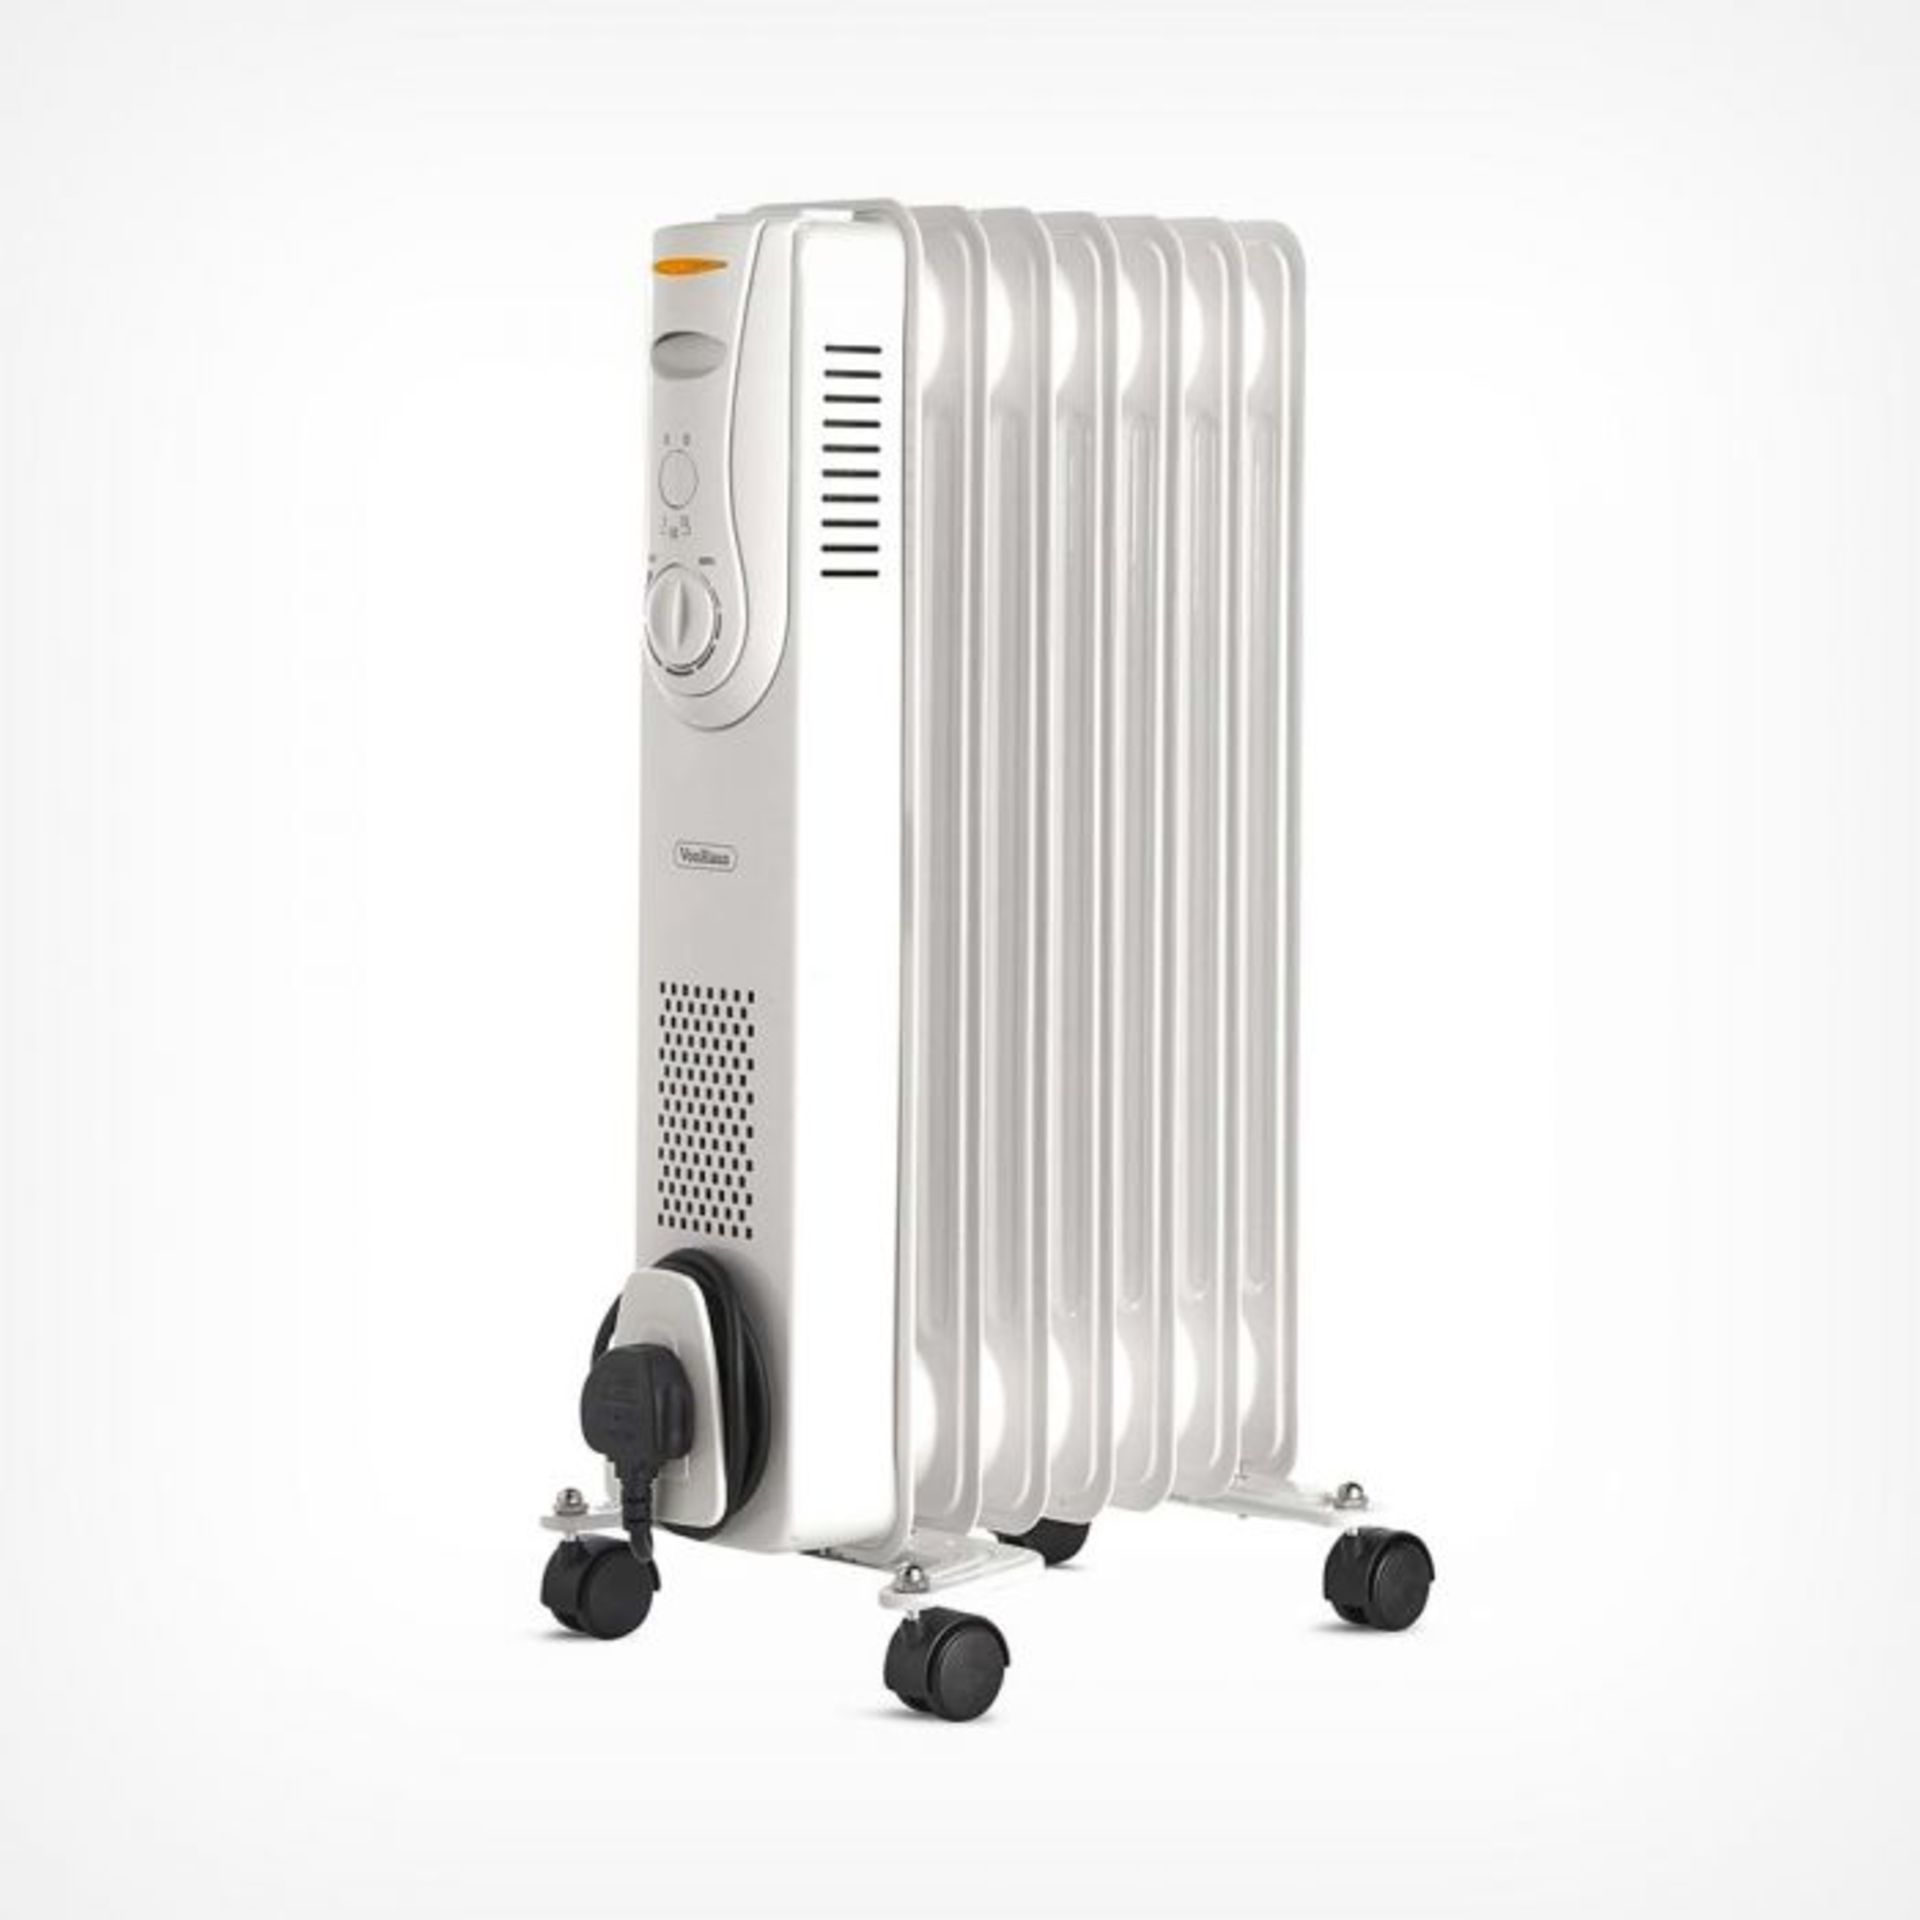 (S91) 7 Fin 1500W Oil Filled Radiator - White Powerful 1500W radiator with 7 oil-filled fins ?... - Image 2 of 3